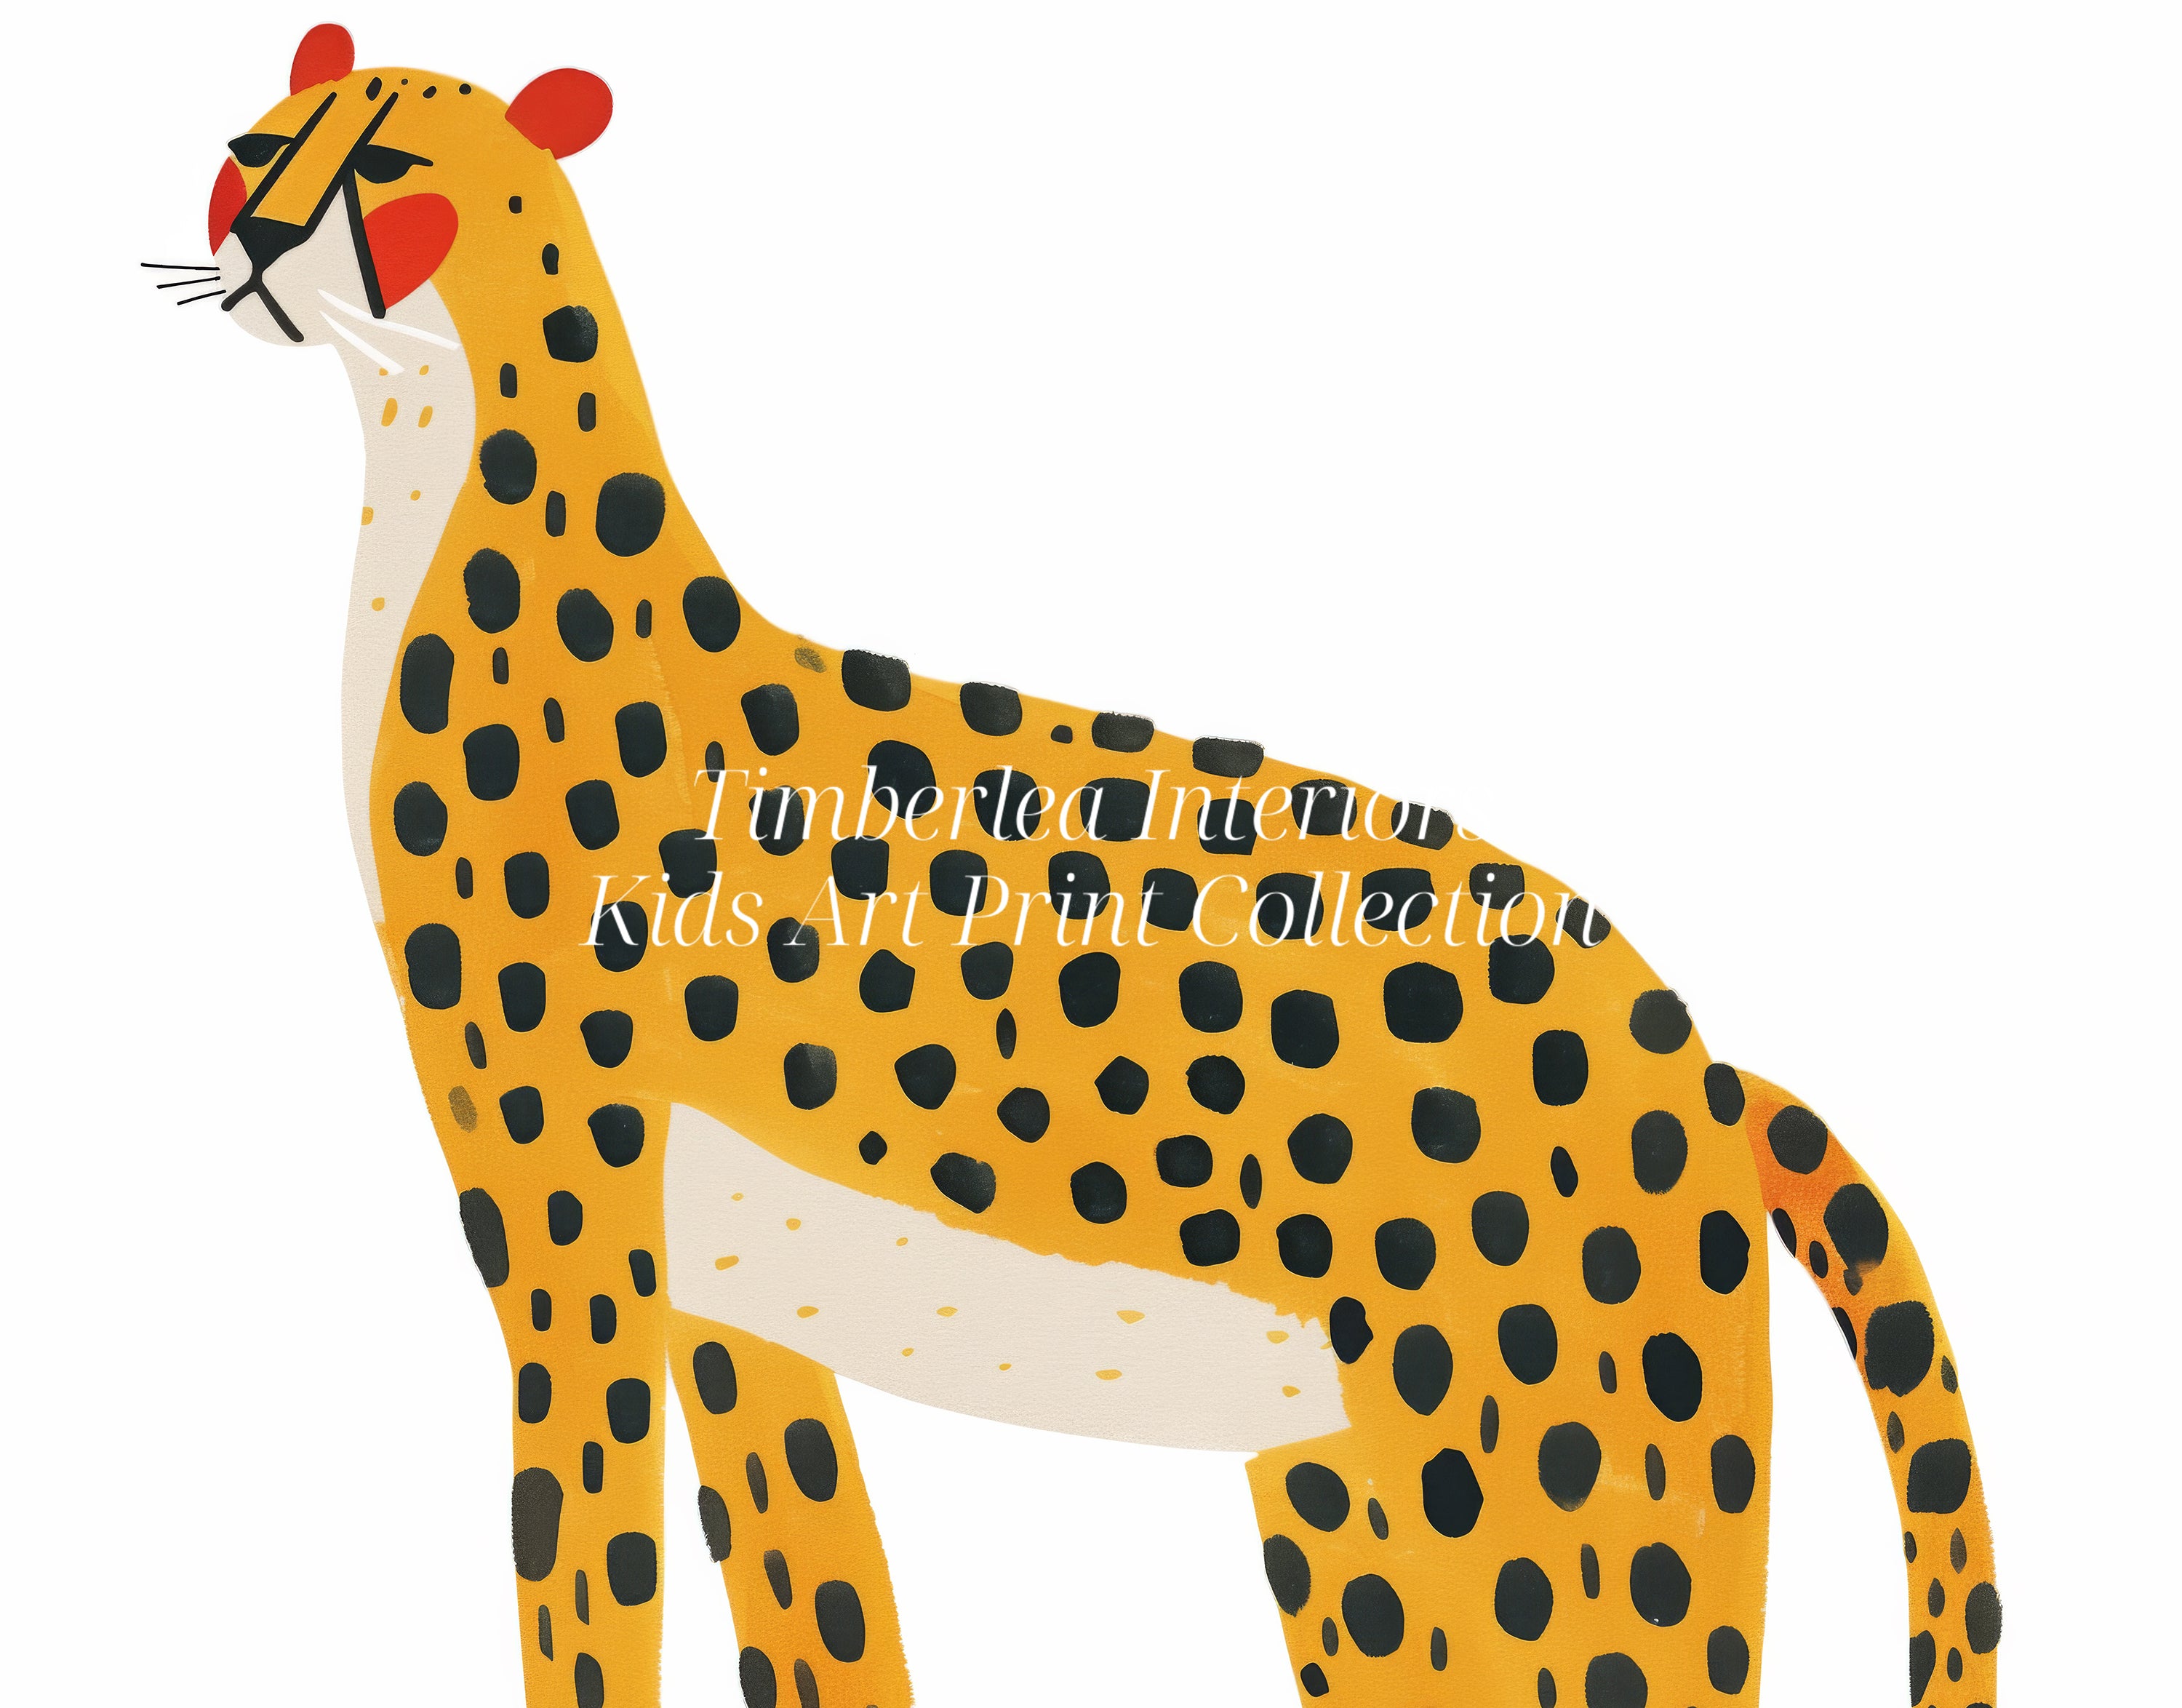 Close-up of Bold Cheetah Art Print from Timberlea Interiors Kids Art Print Collection, featuring a vibrant yellow and black cheetah illustration